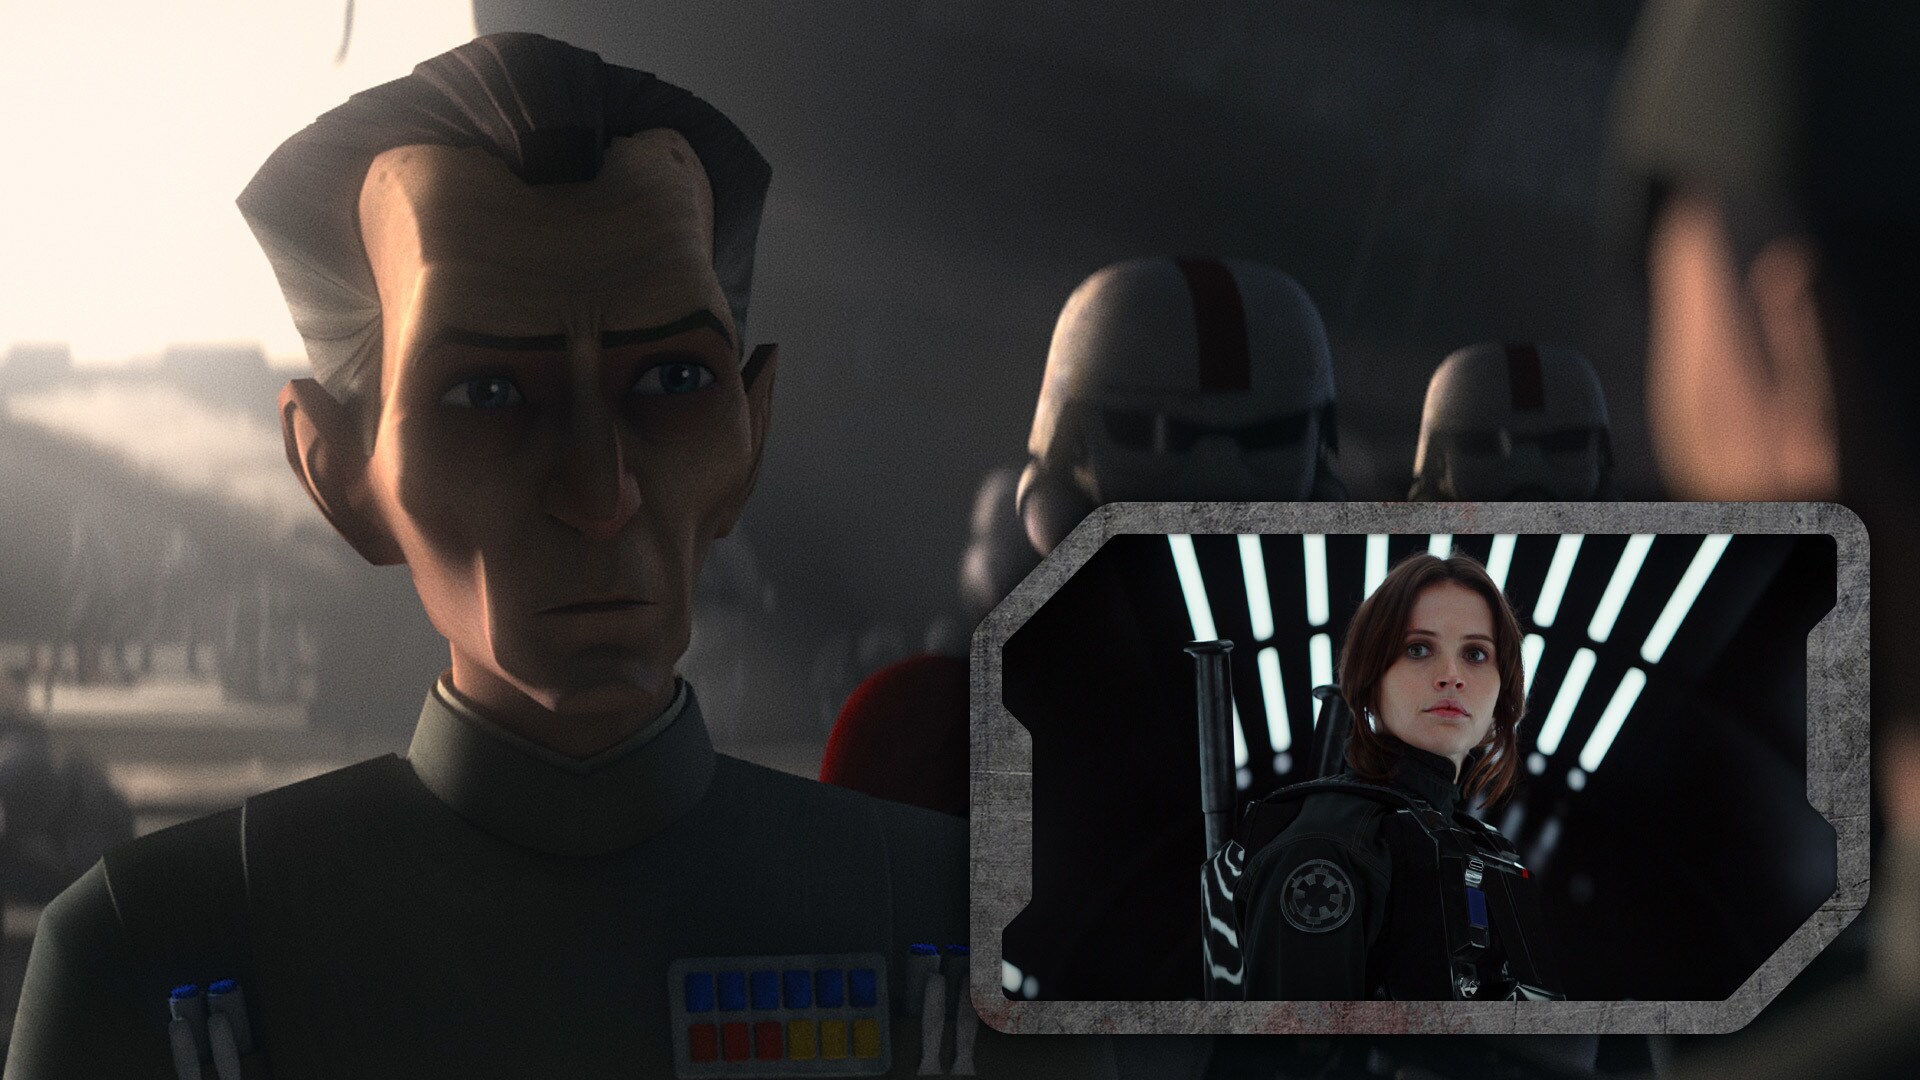 Tarkin orders that all funding for Hemlock’s projects and the Tantiss facility be redistributed to Project Stardust: the Death Star initiative as established in Rogue One: A Star Wars Story.